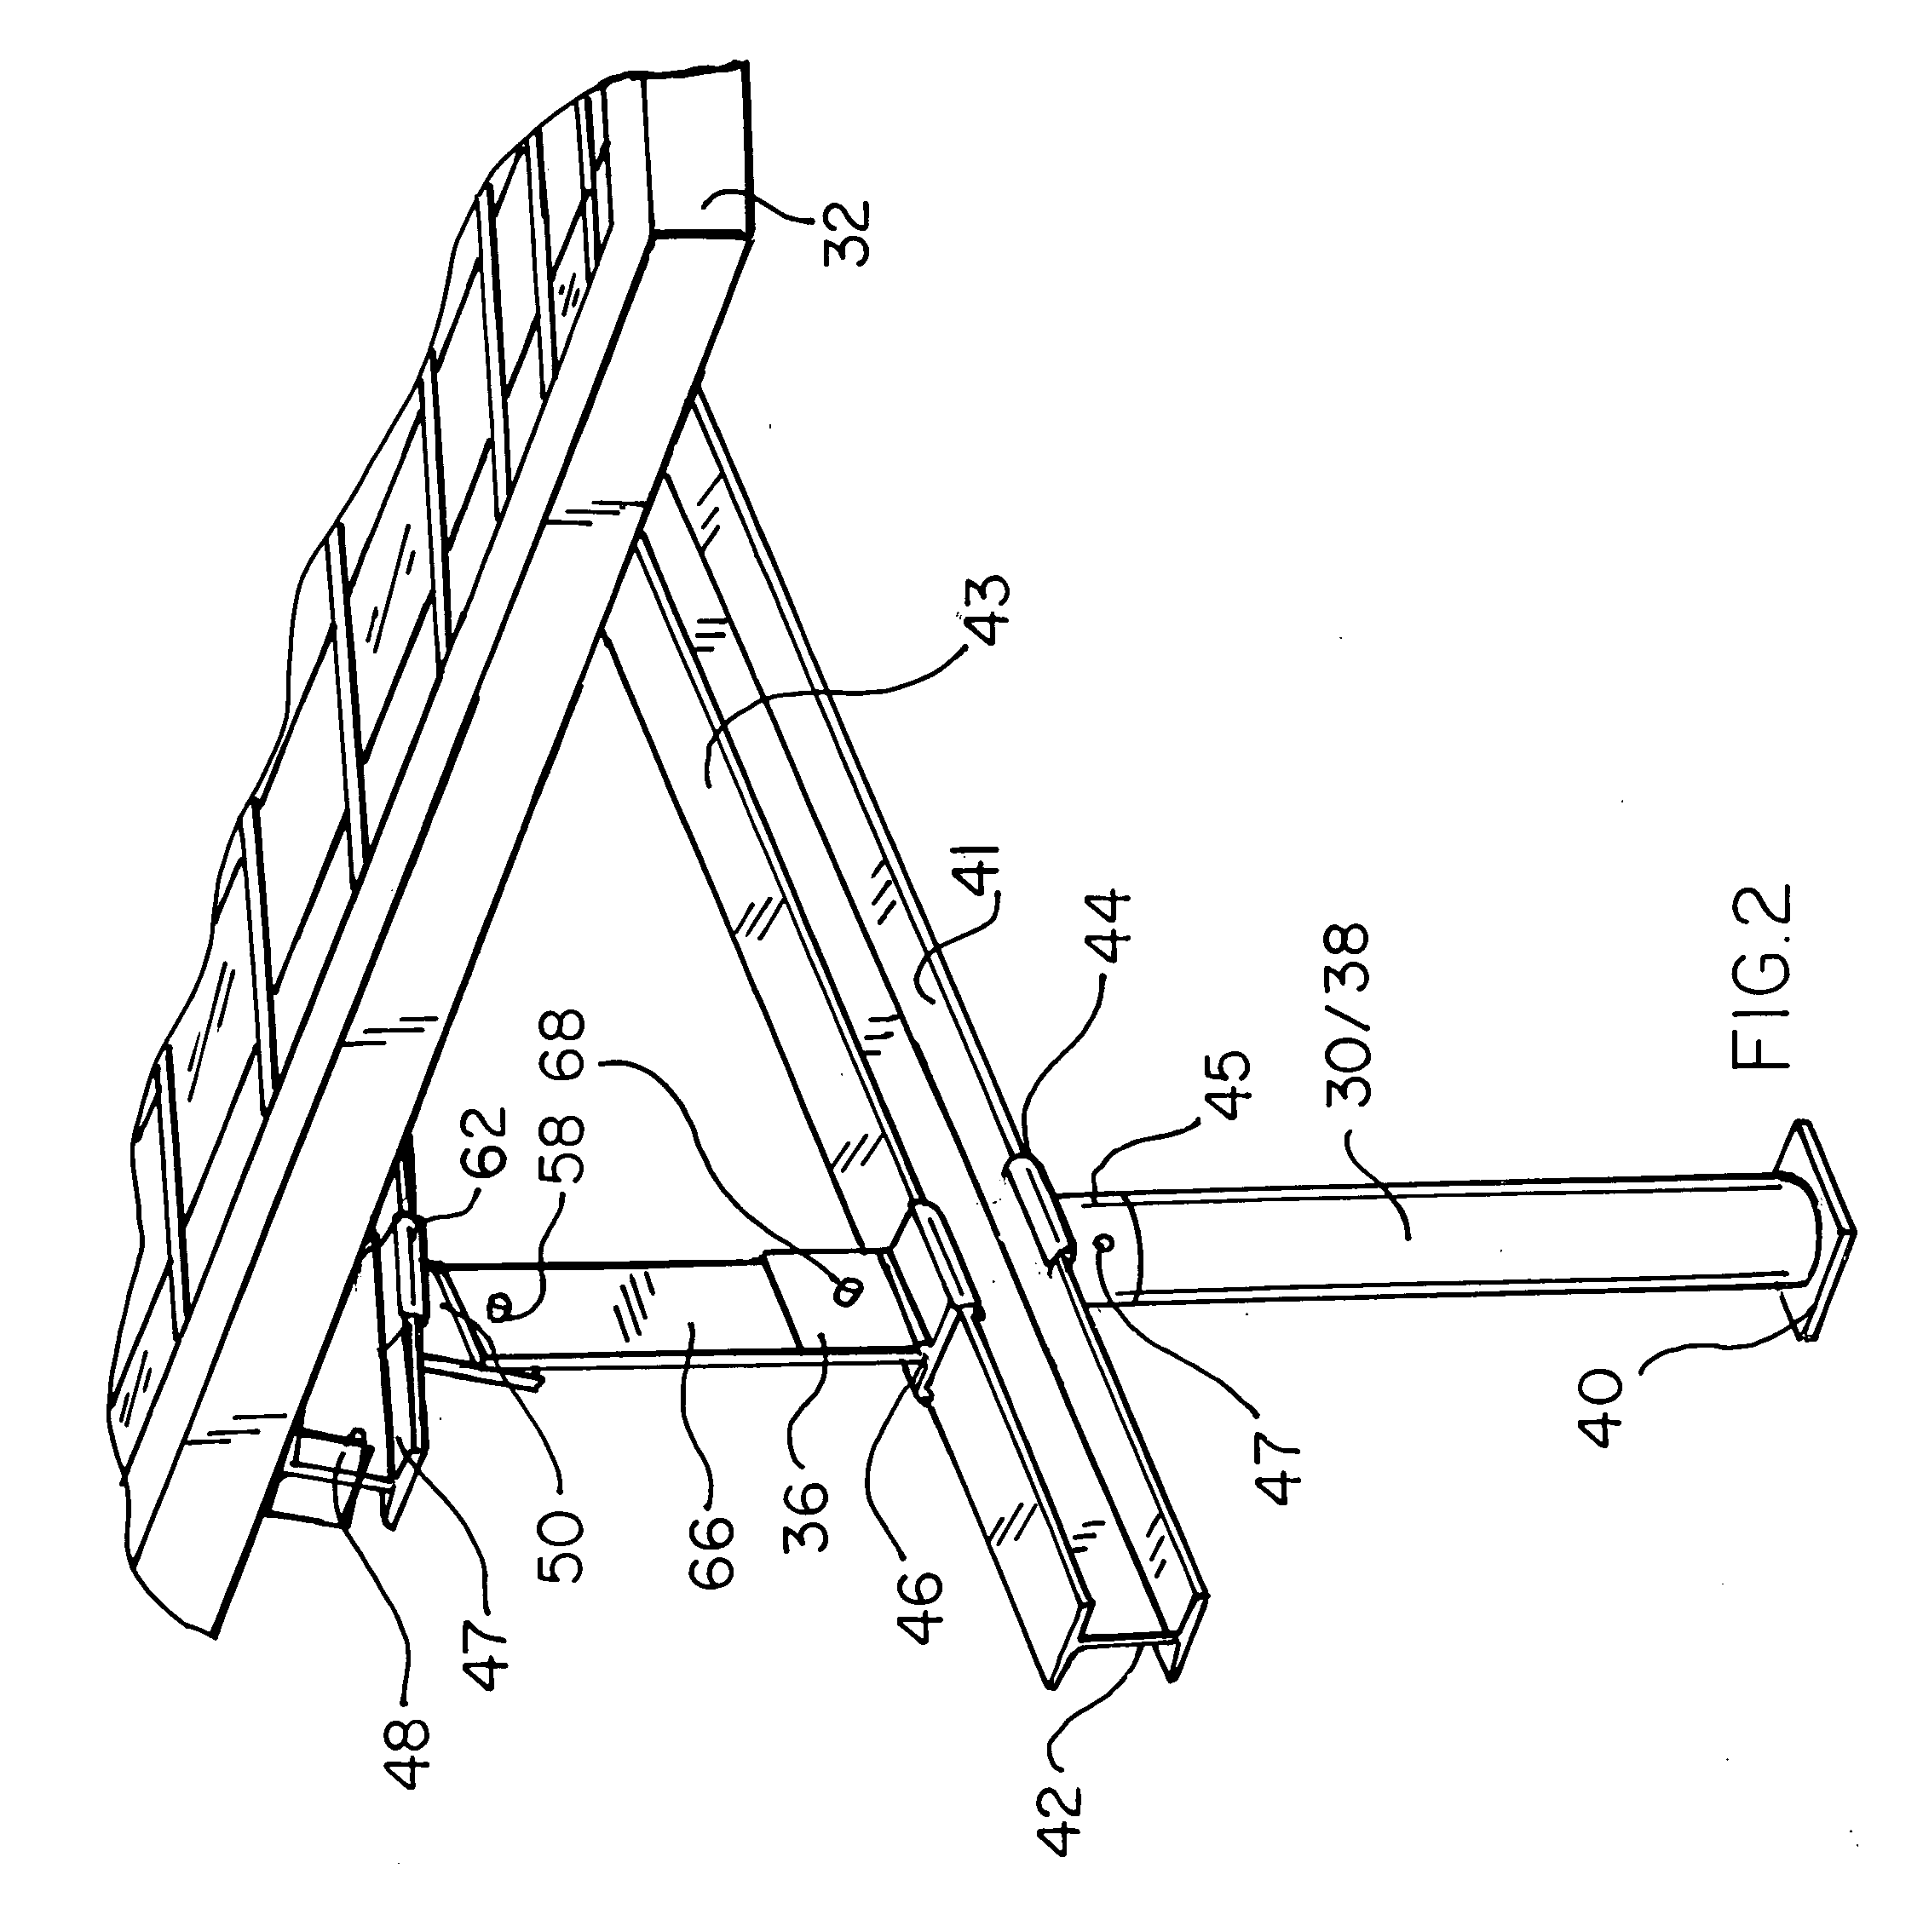 System for mounting and selectable adjustment of angle of elevation of groups of PV panels